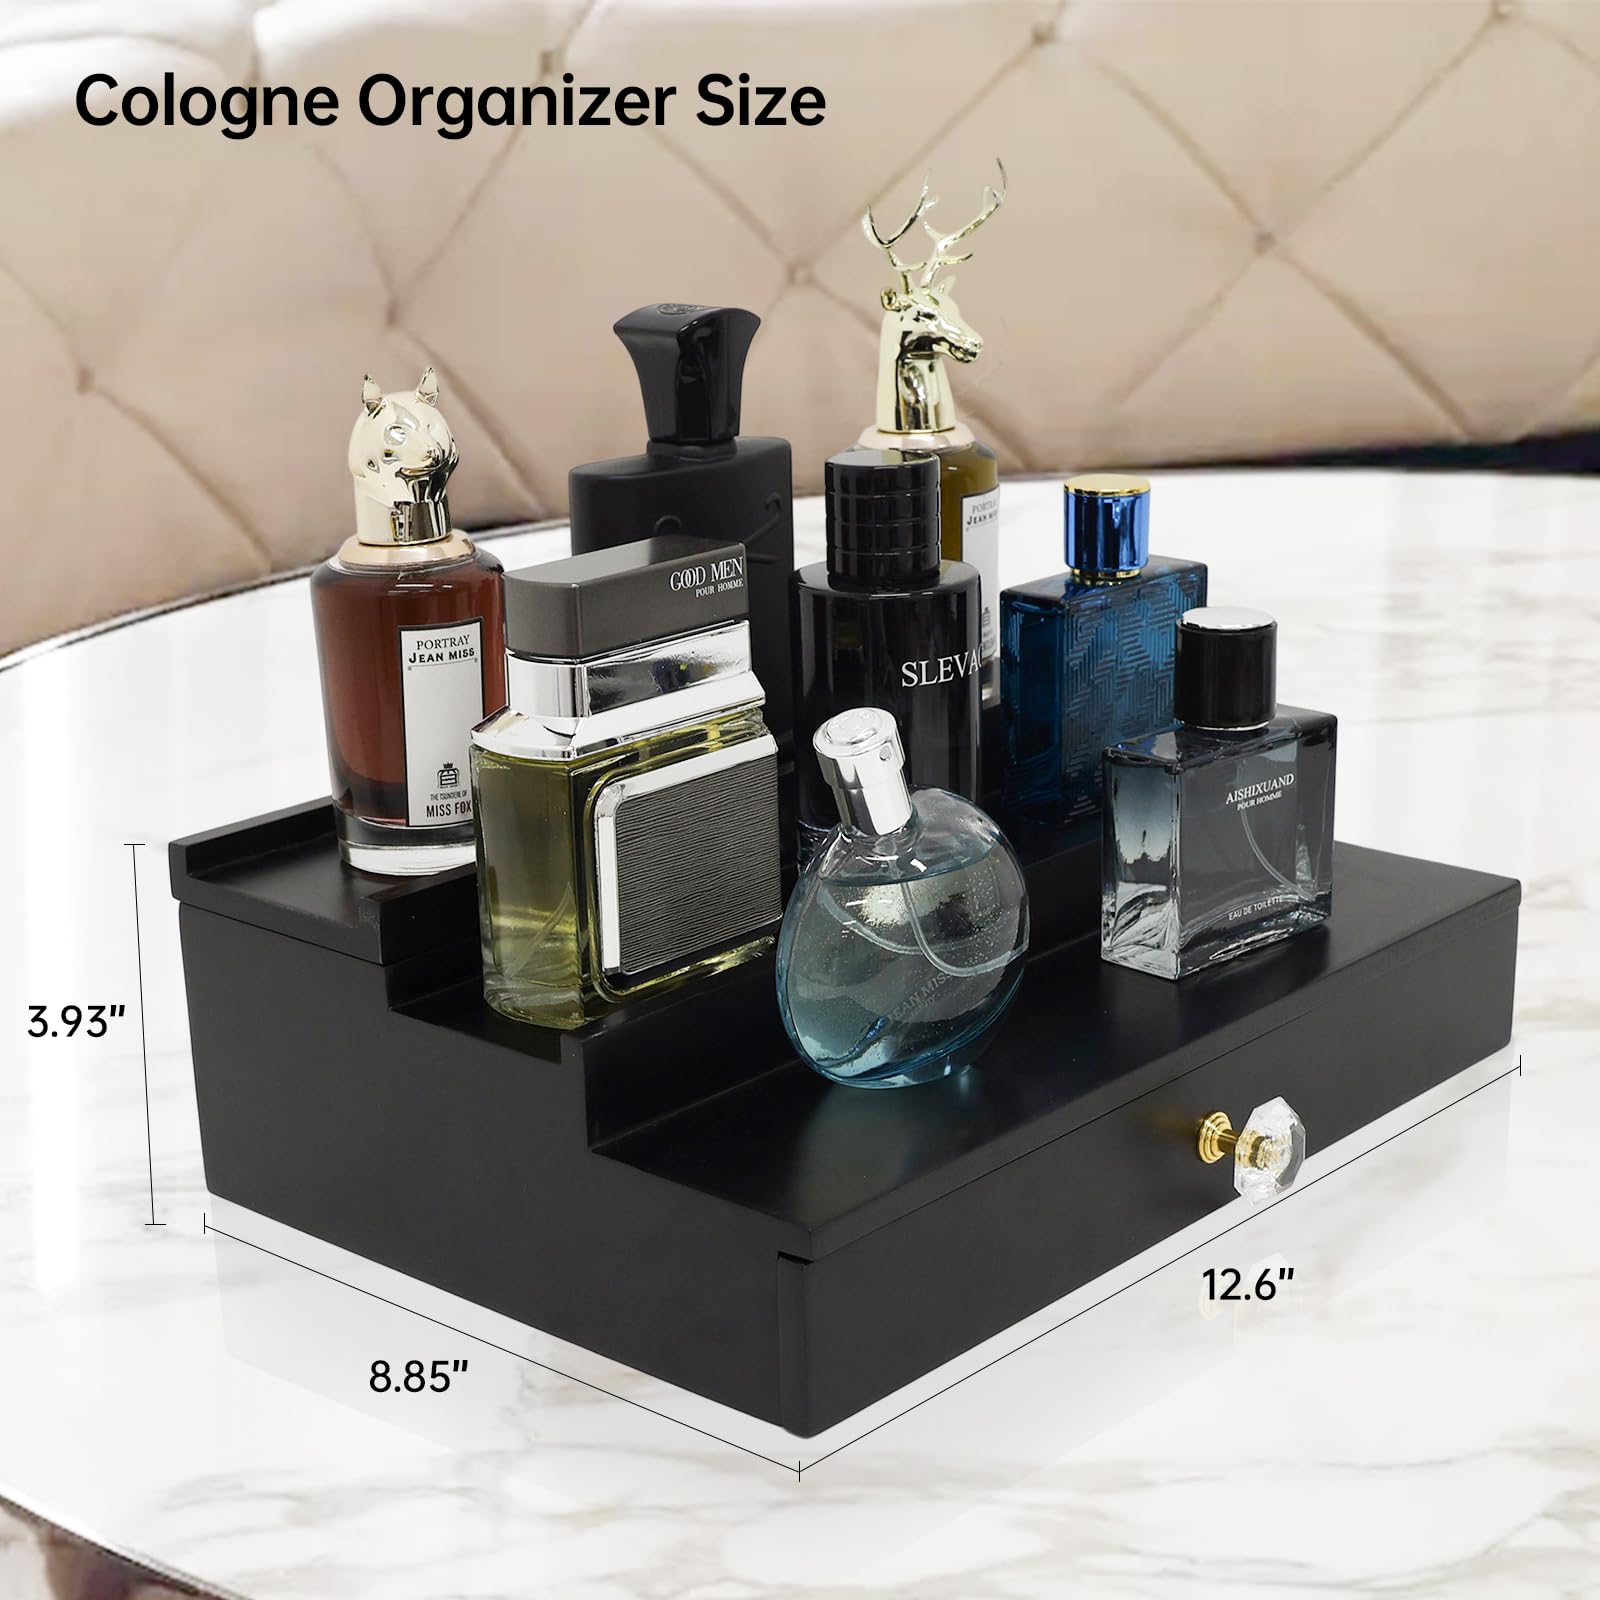 Cologne Organizer for Men 3 Tier Cologne Stand with Drawer and Hidden Compartment Cologne Holder Organizer for Men, Wood, Ccologne Shelf for Men Gift Perfume Organizer Mens Home Decor Cologne Tray